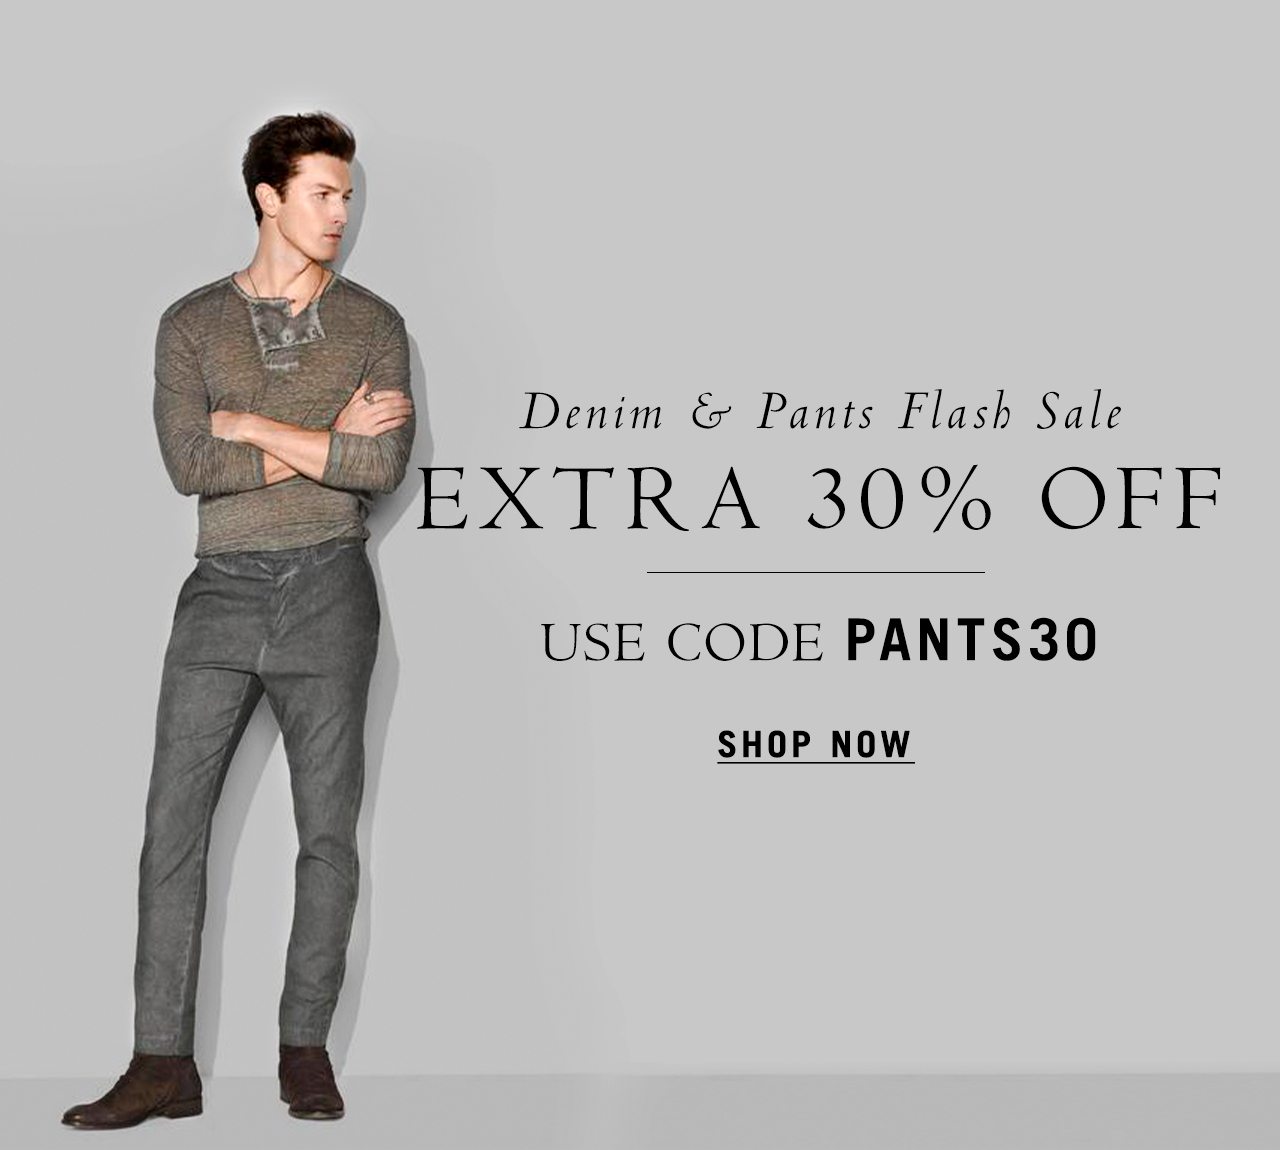 Extra 30% Off Pants & Denim for a Limited Time Only